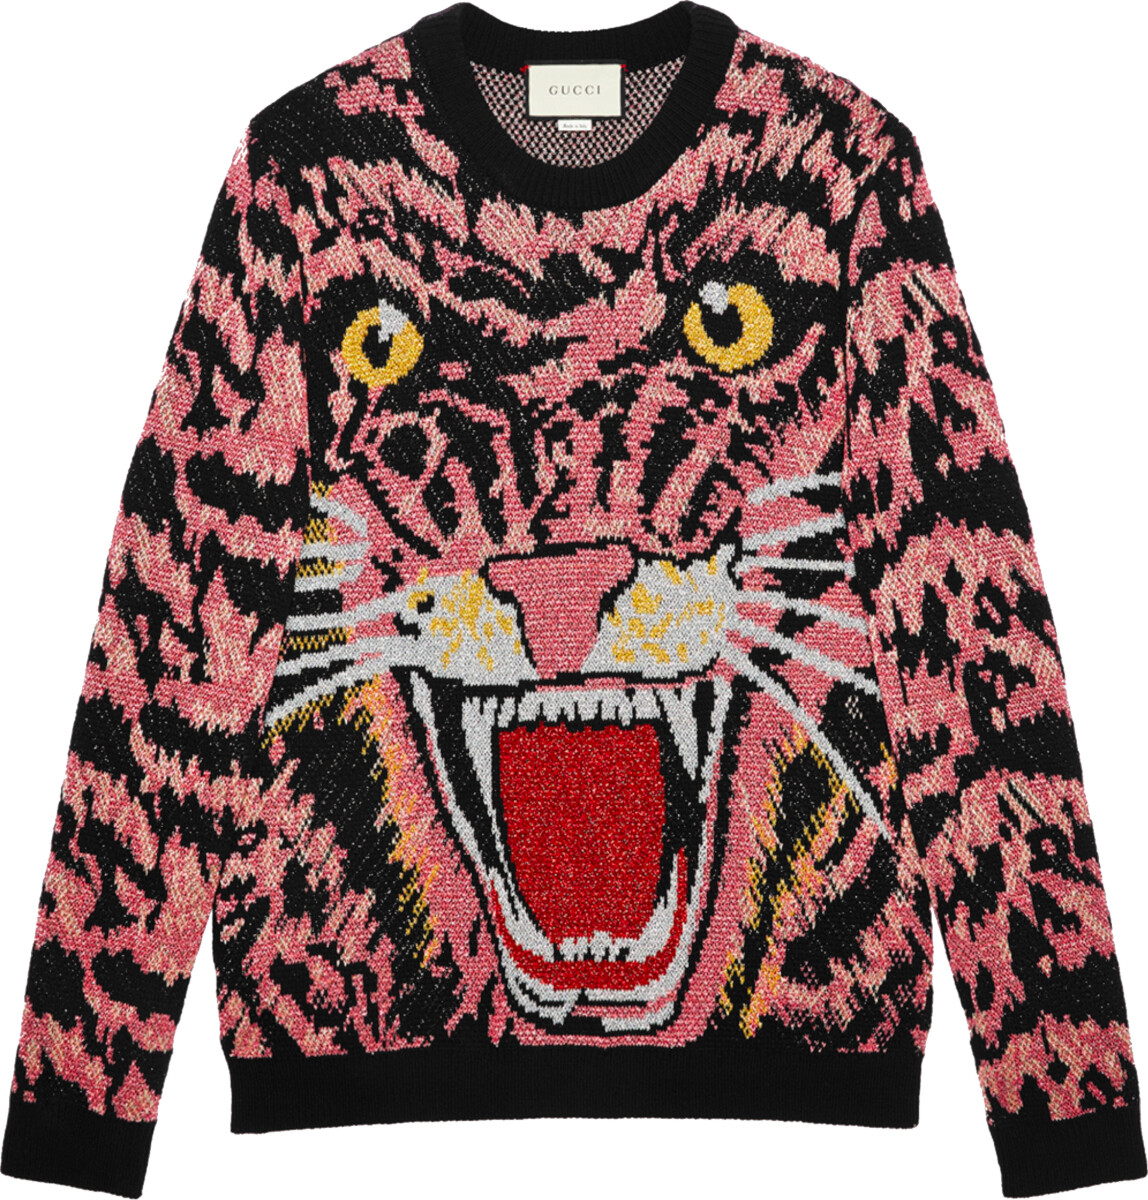 Gucci Pink & Black Tiger Sweater | Incorporated Style